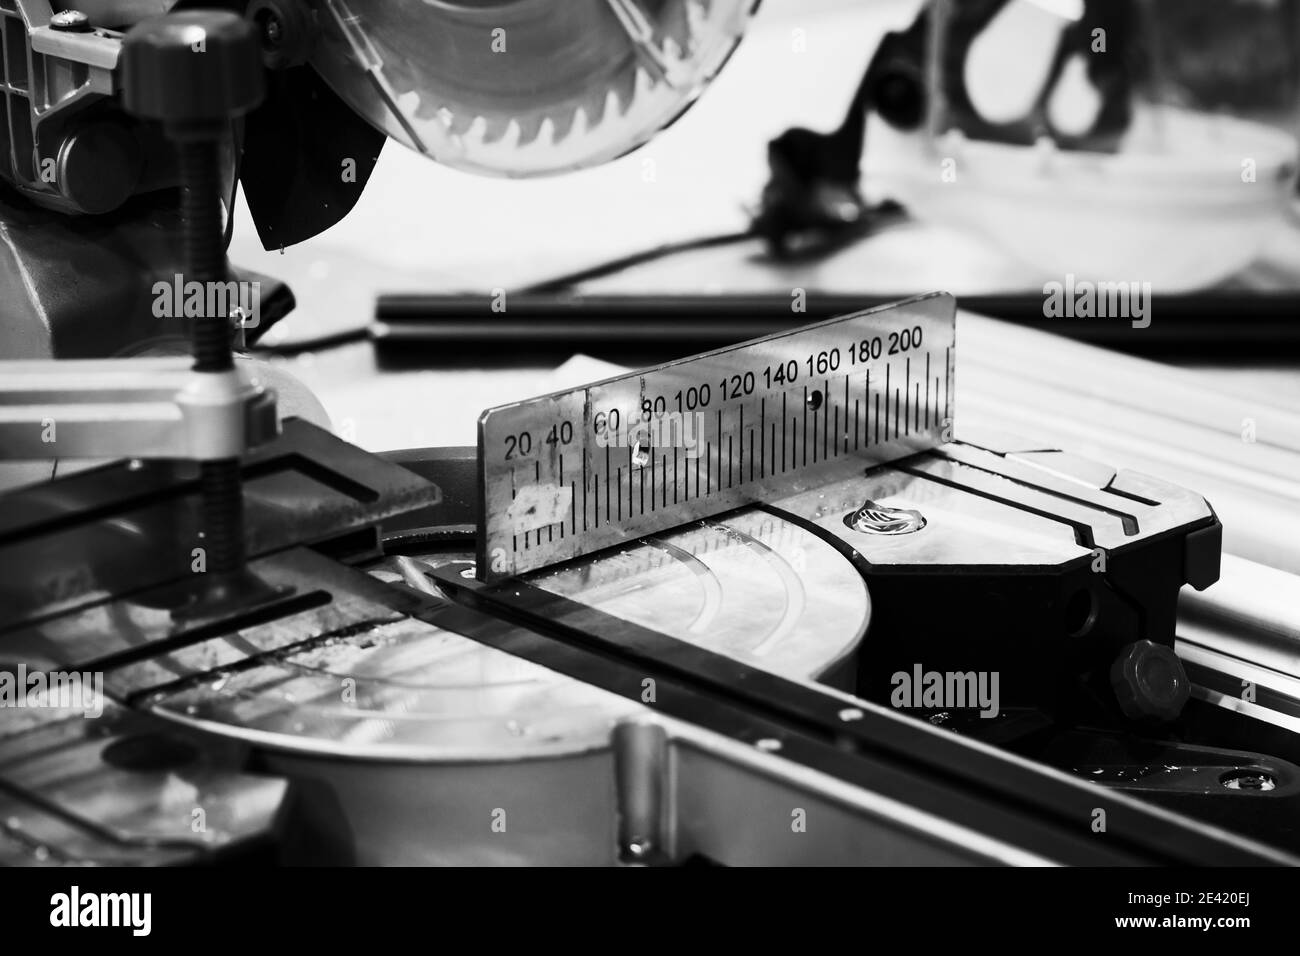 Miter saw with ruler, close-up black and white photo with selective sort focus Stock Photo